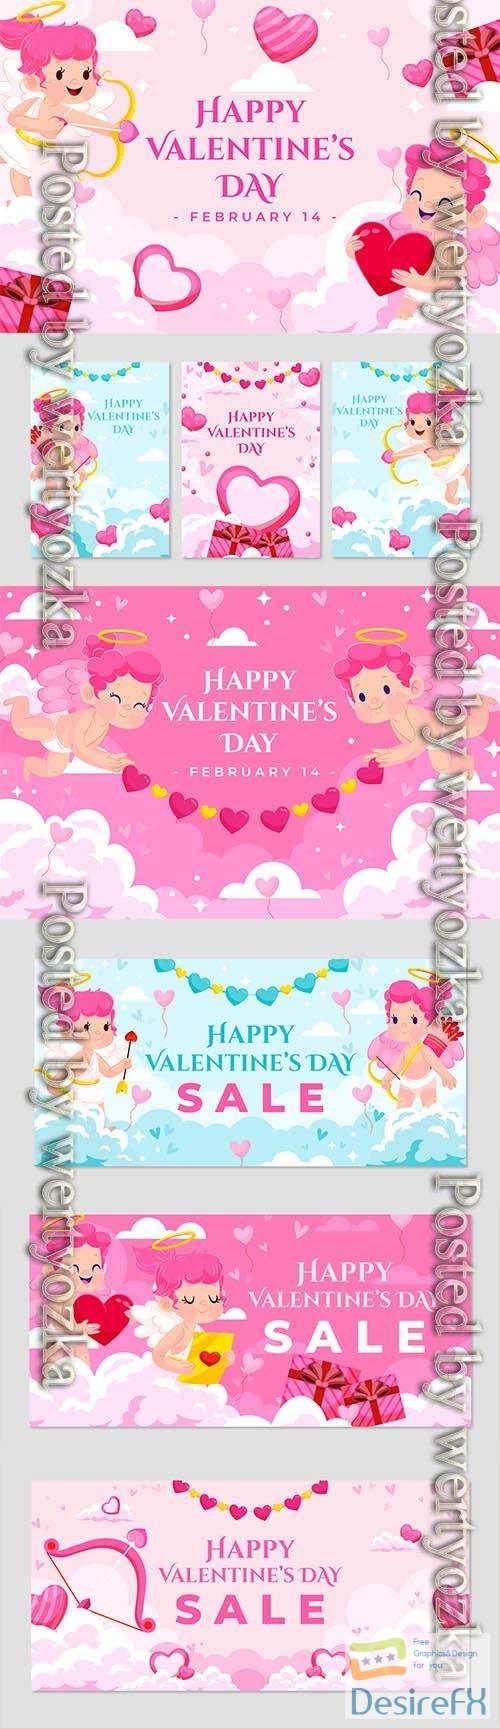 Vector flat valentines day background